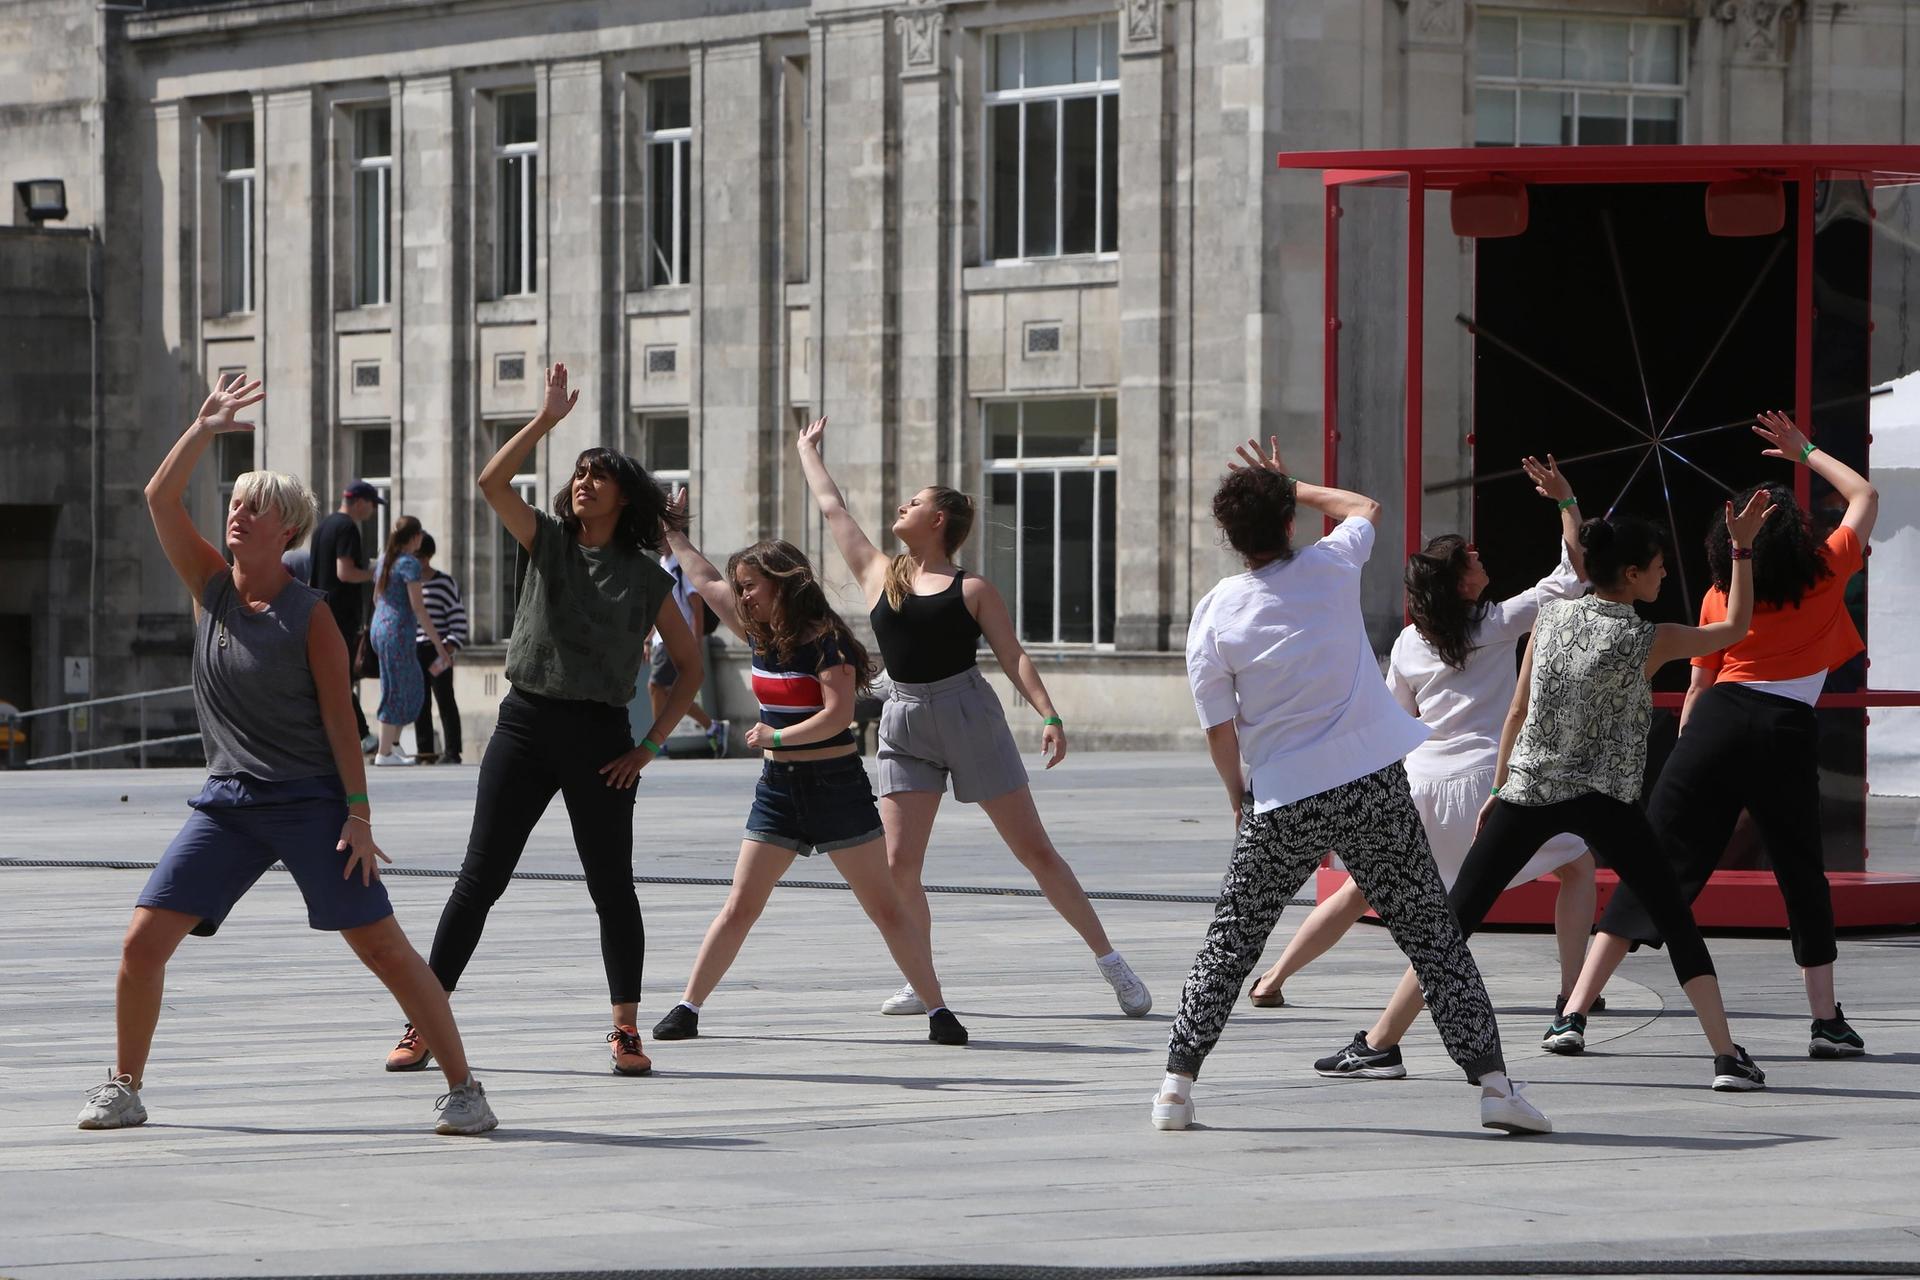 Emma Smith, The Supercompensation Cycle installation and performance, choreography in collaboration with Lorena Randi, Guildhall Square, Southampton, 2022. 

Photography courtesy of Rachel Adams for the UEFA Women’s EURO arts programme